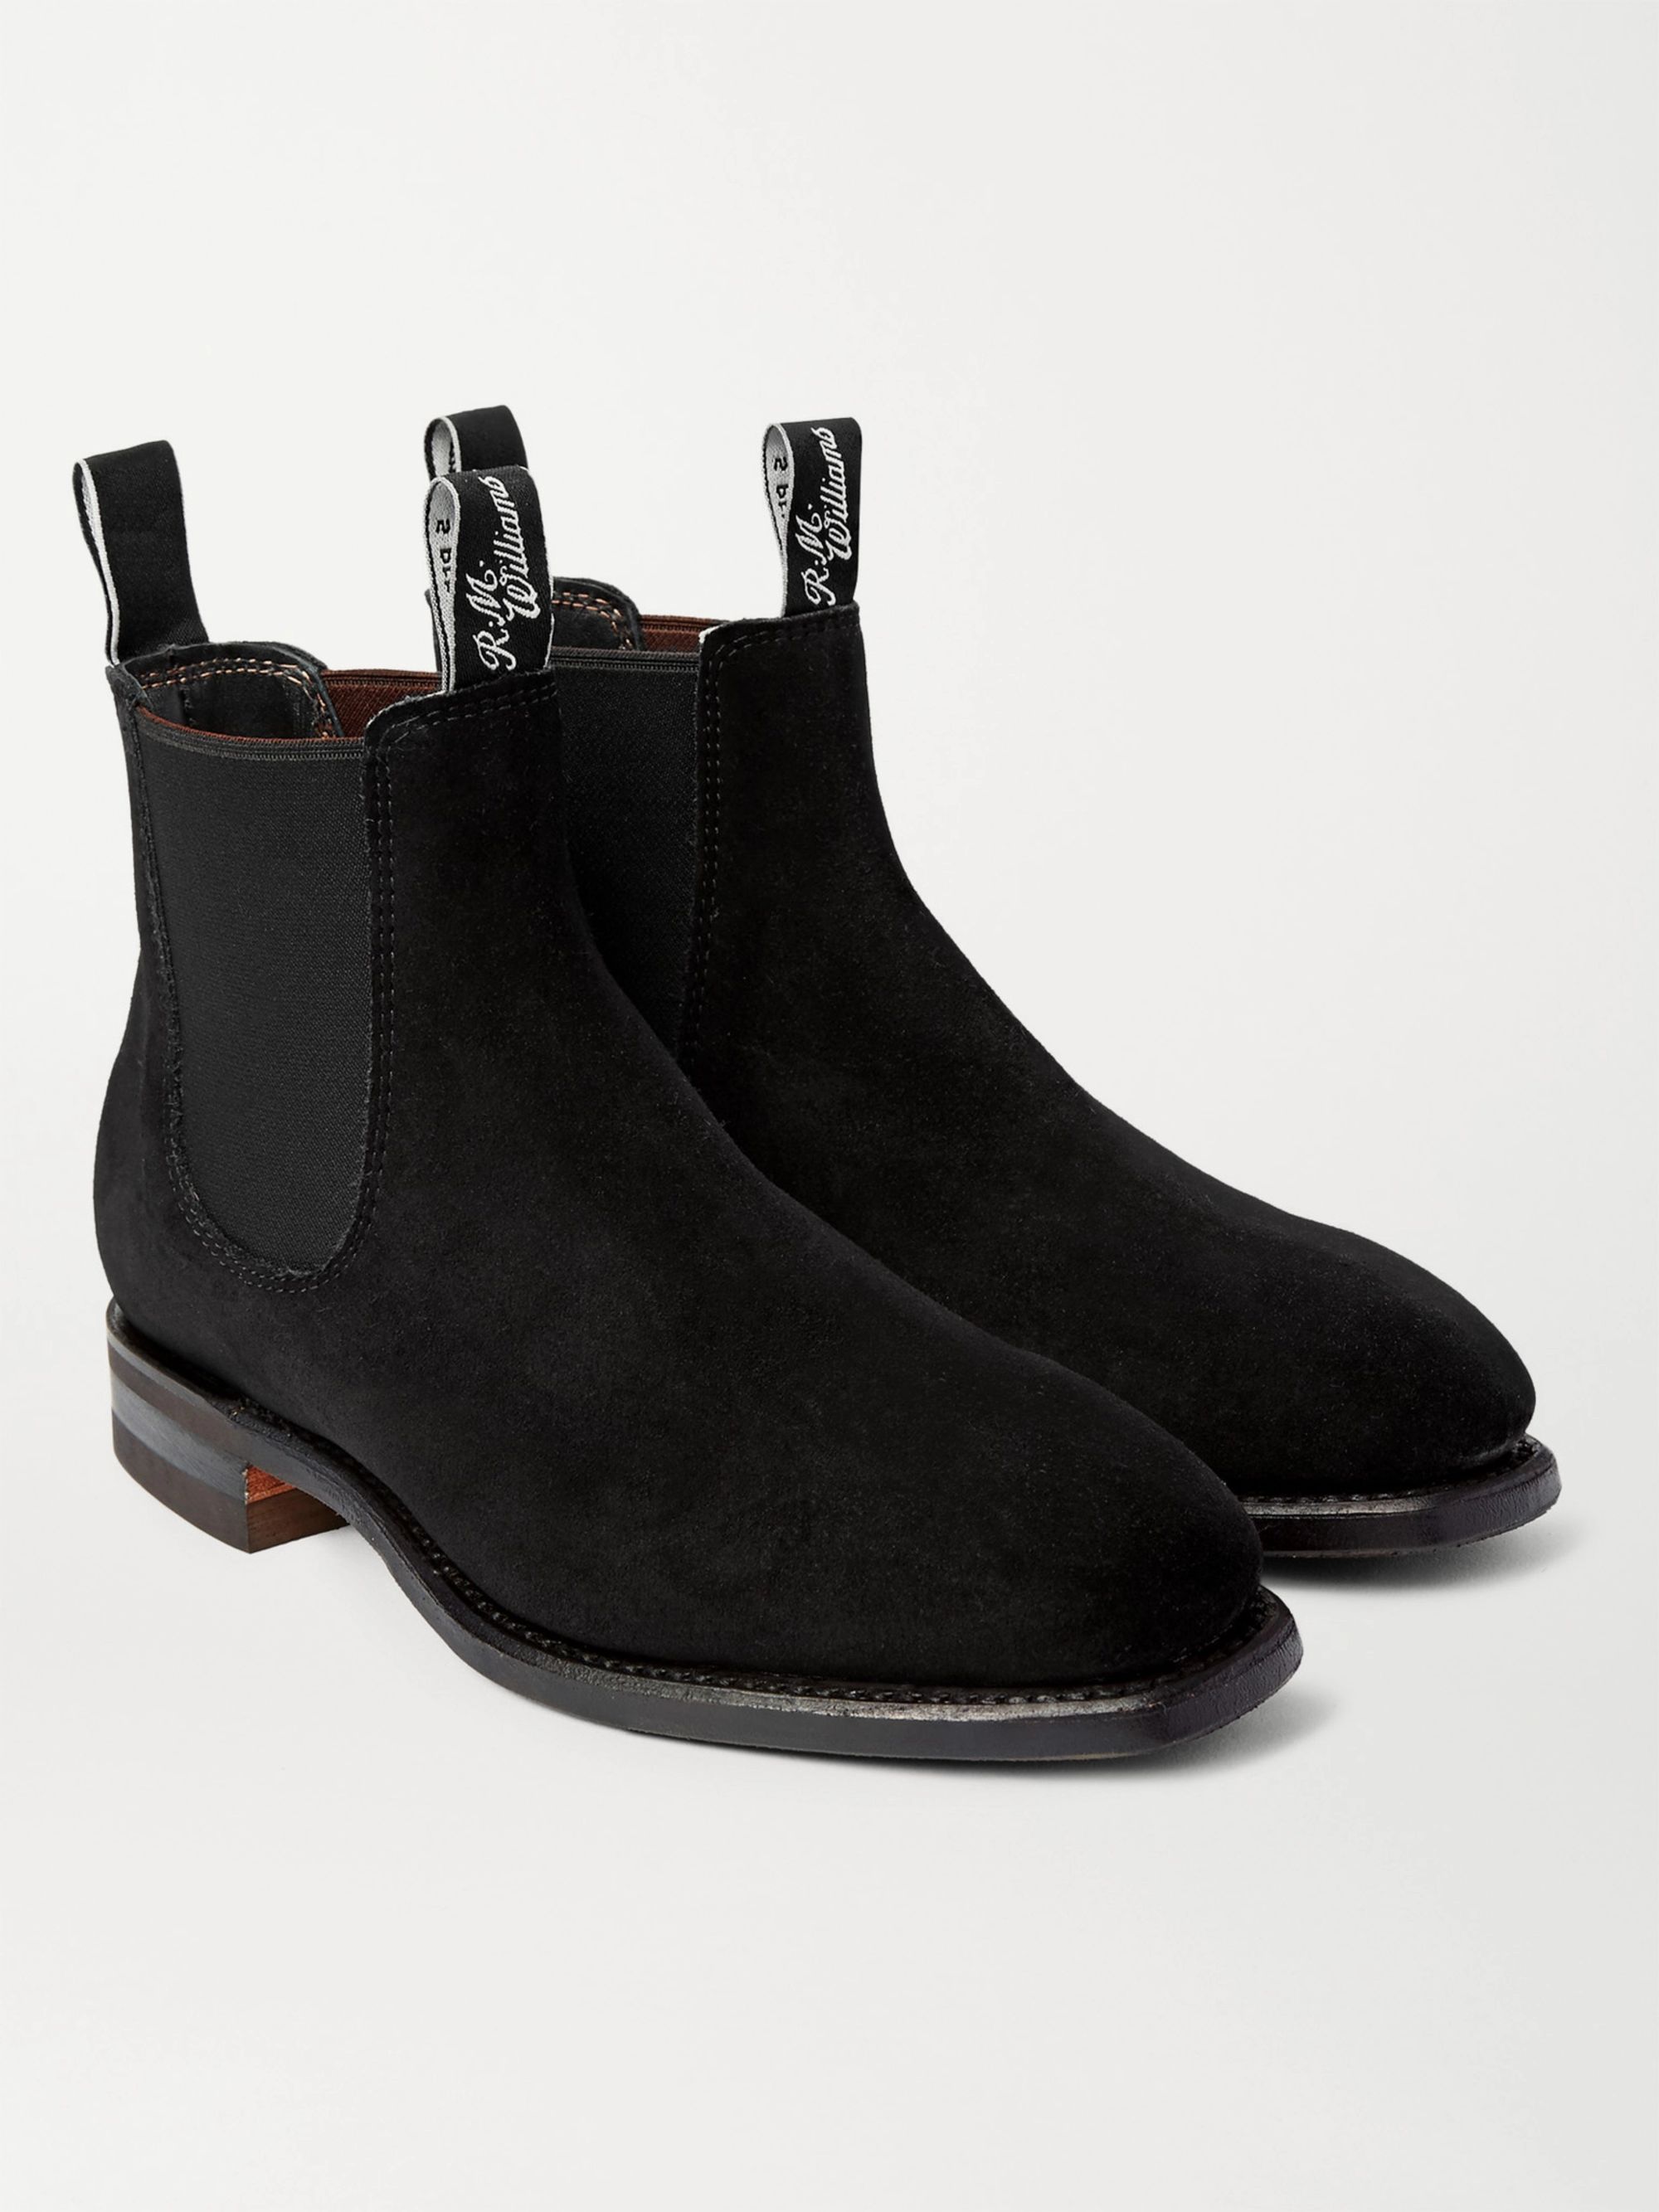 rm williams black suede boots